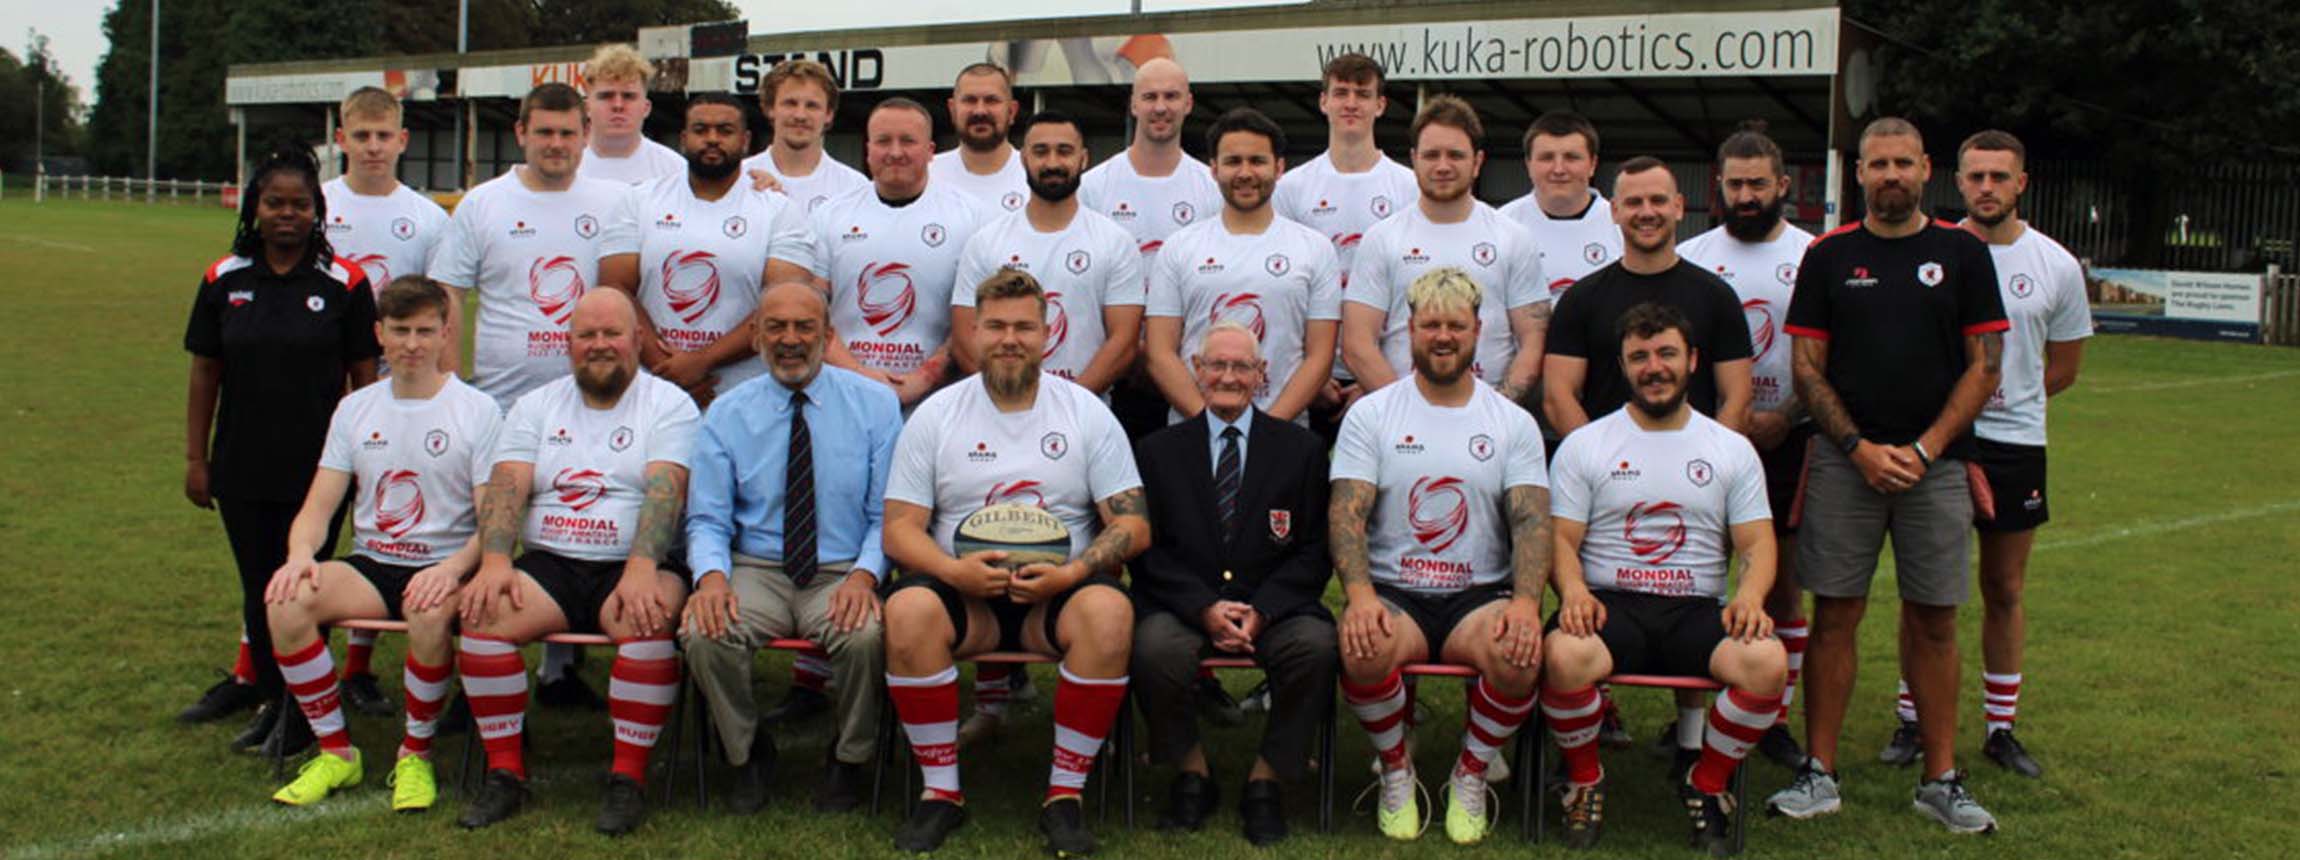 The rugby lions team